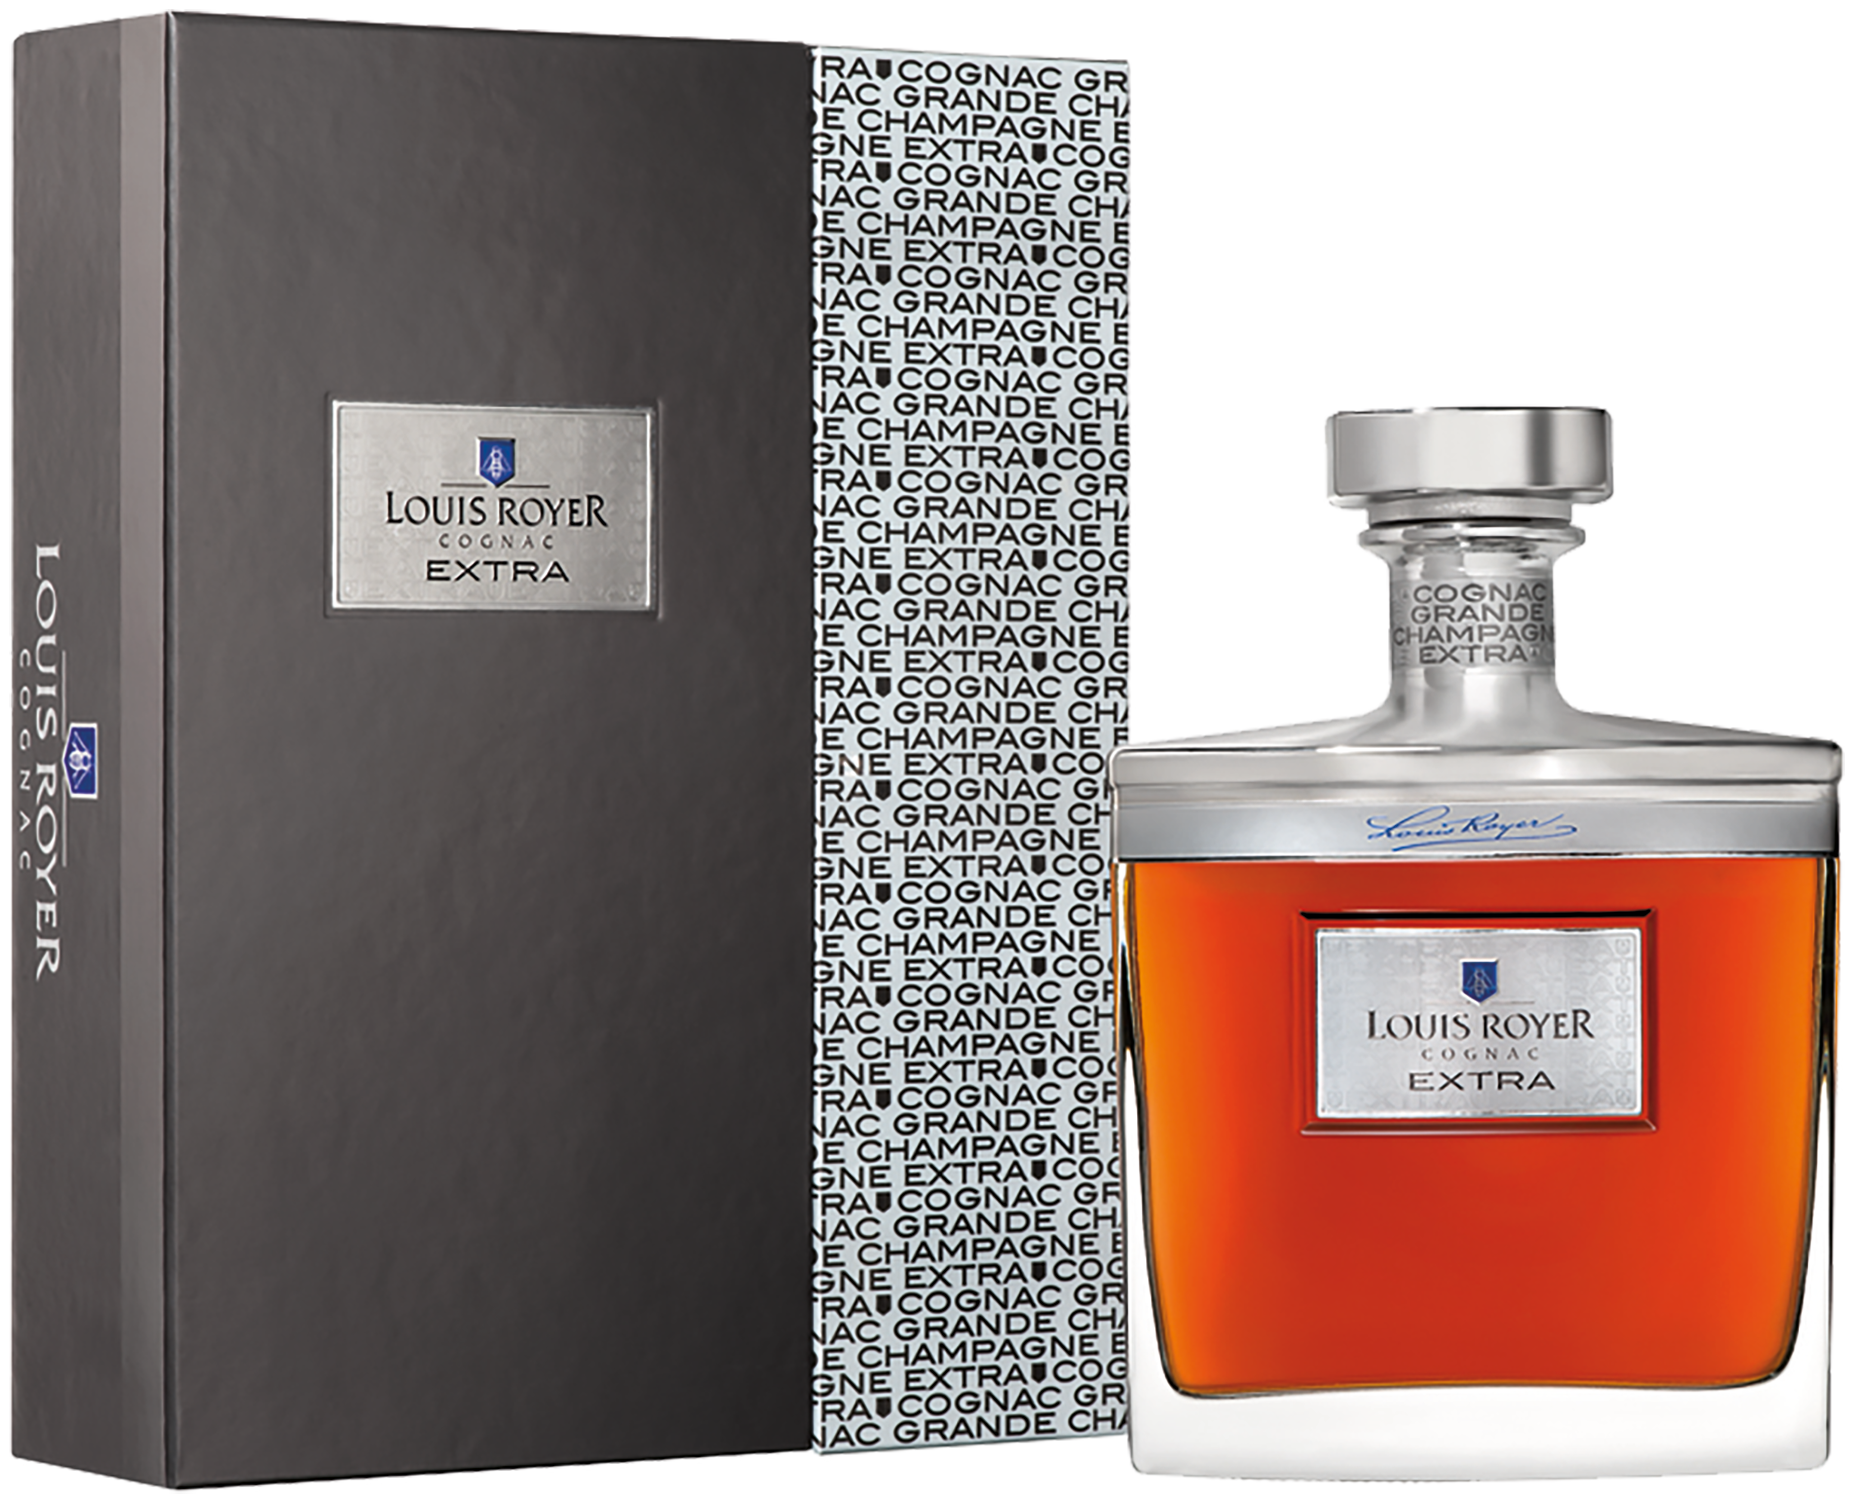 louis royer cognac grande champagne extra gift box Louis Royer Cognac Grande Champagne Extra (gift box)